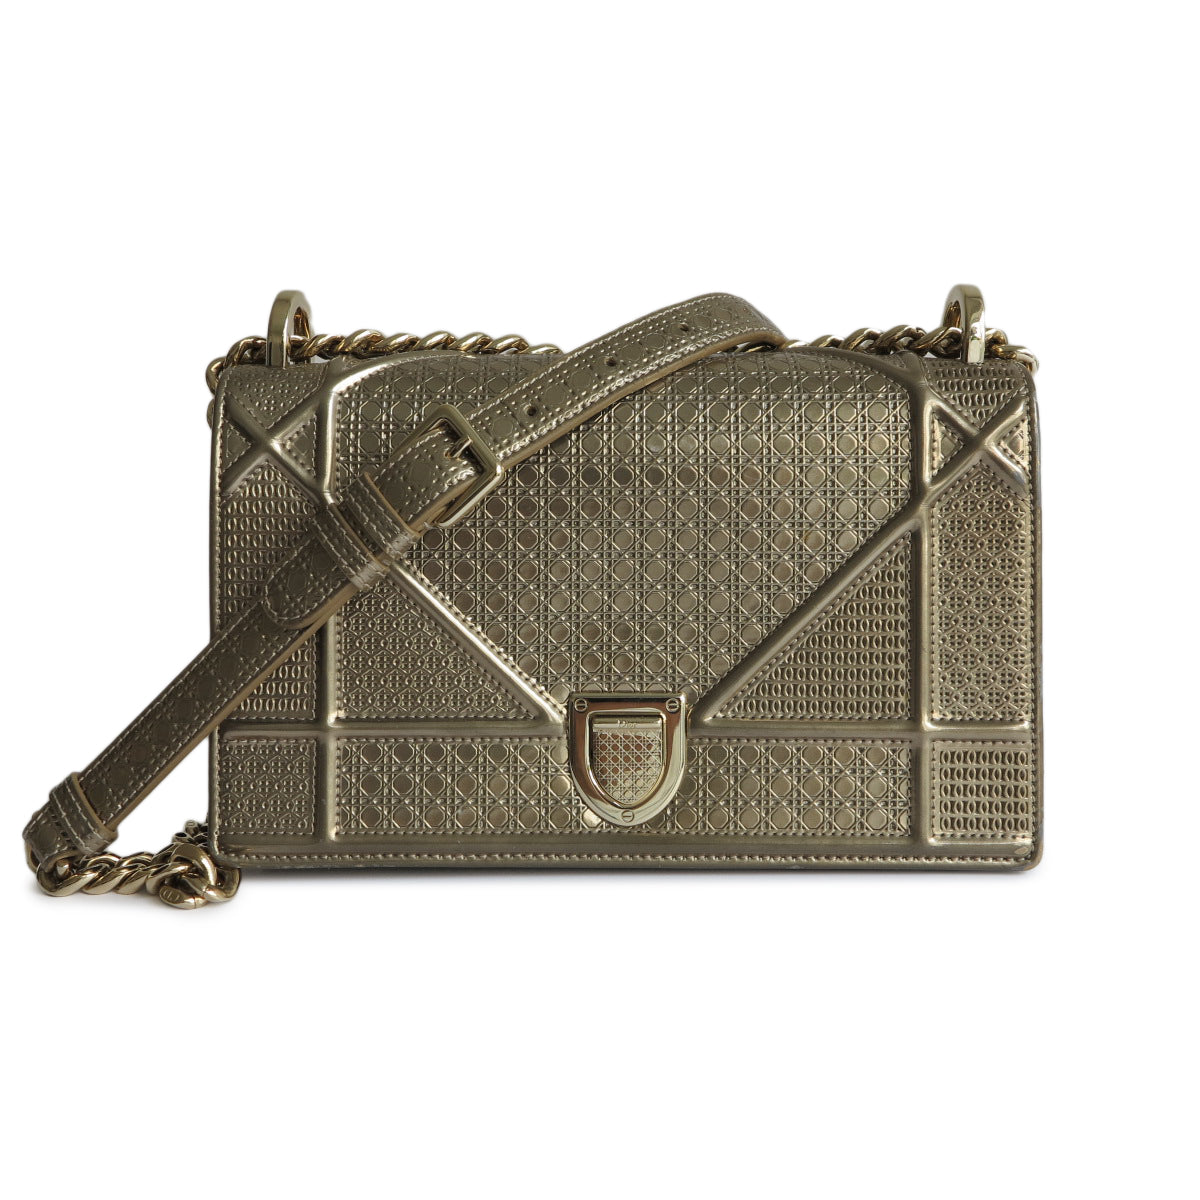 Small Diorama Bag in Gold Micro-Cannage Patent Leather